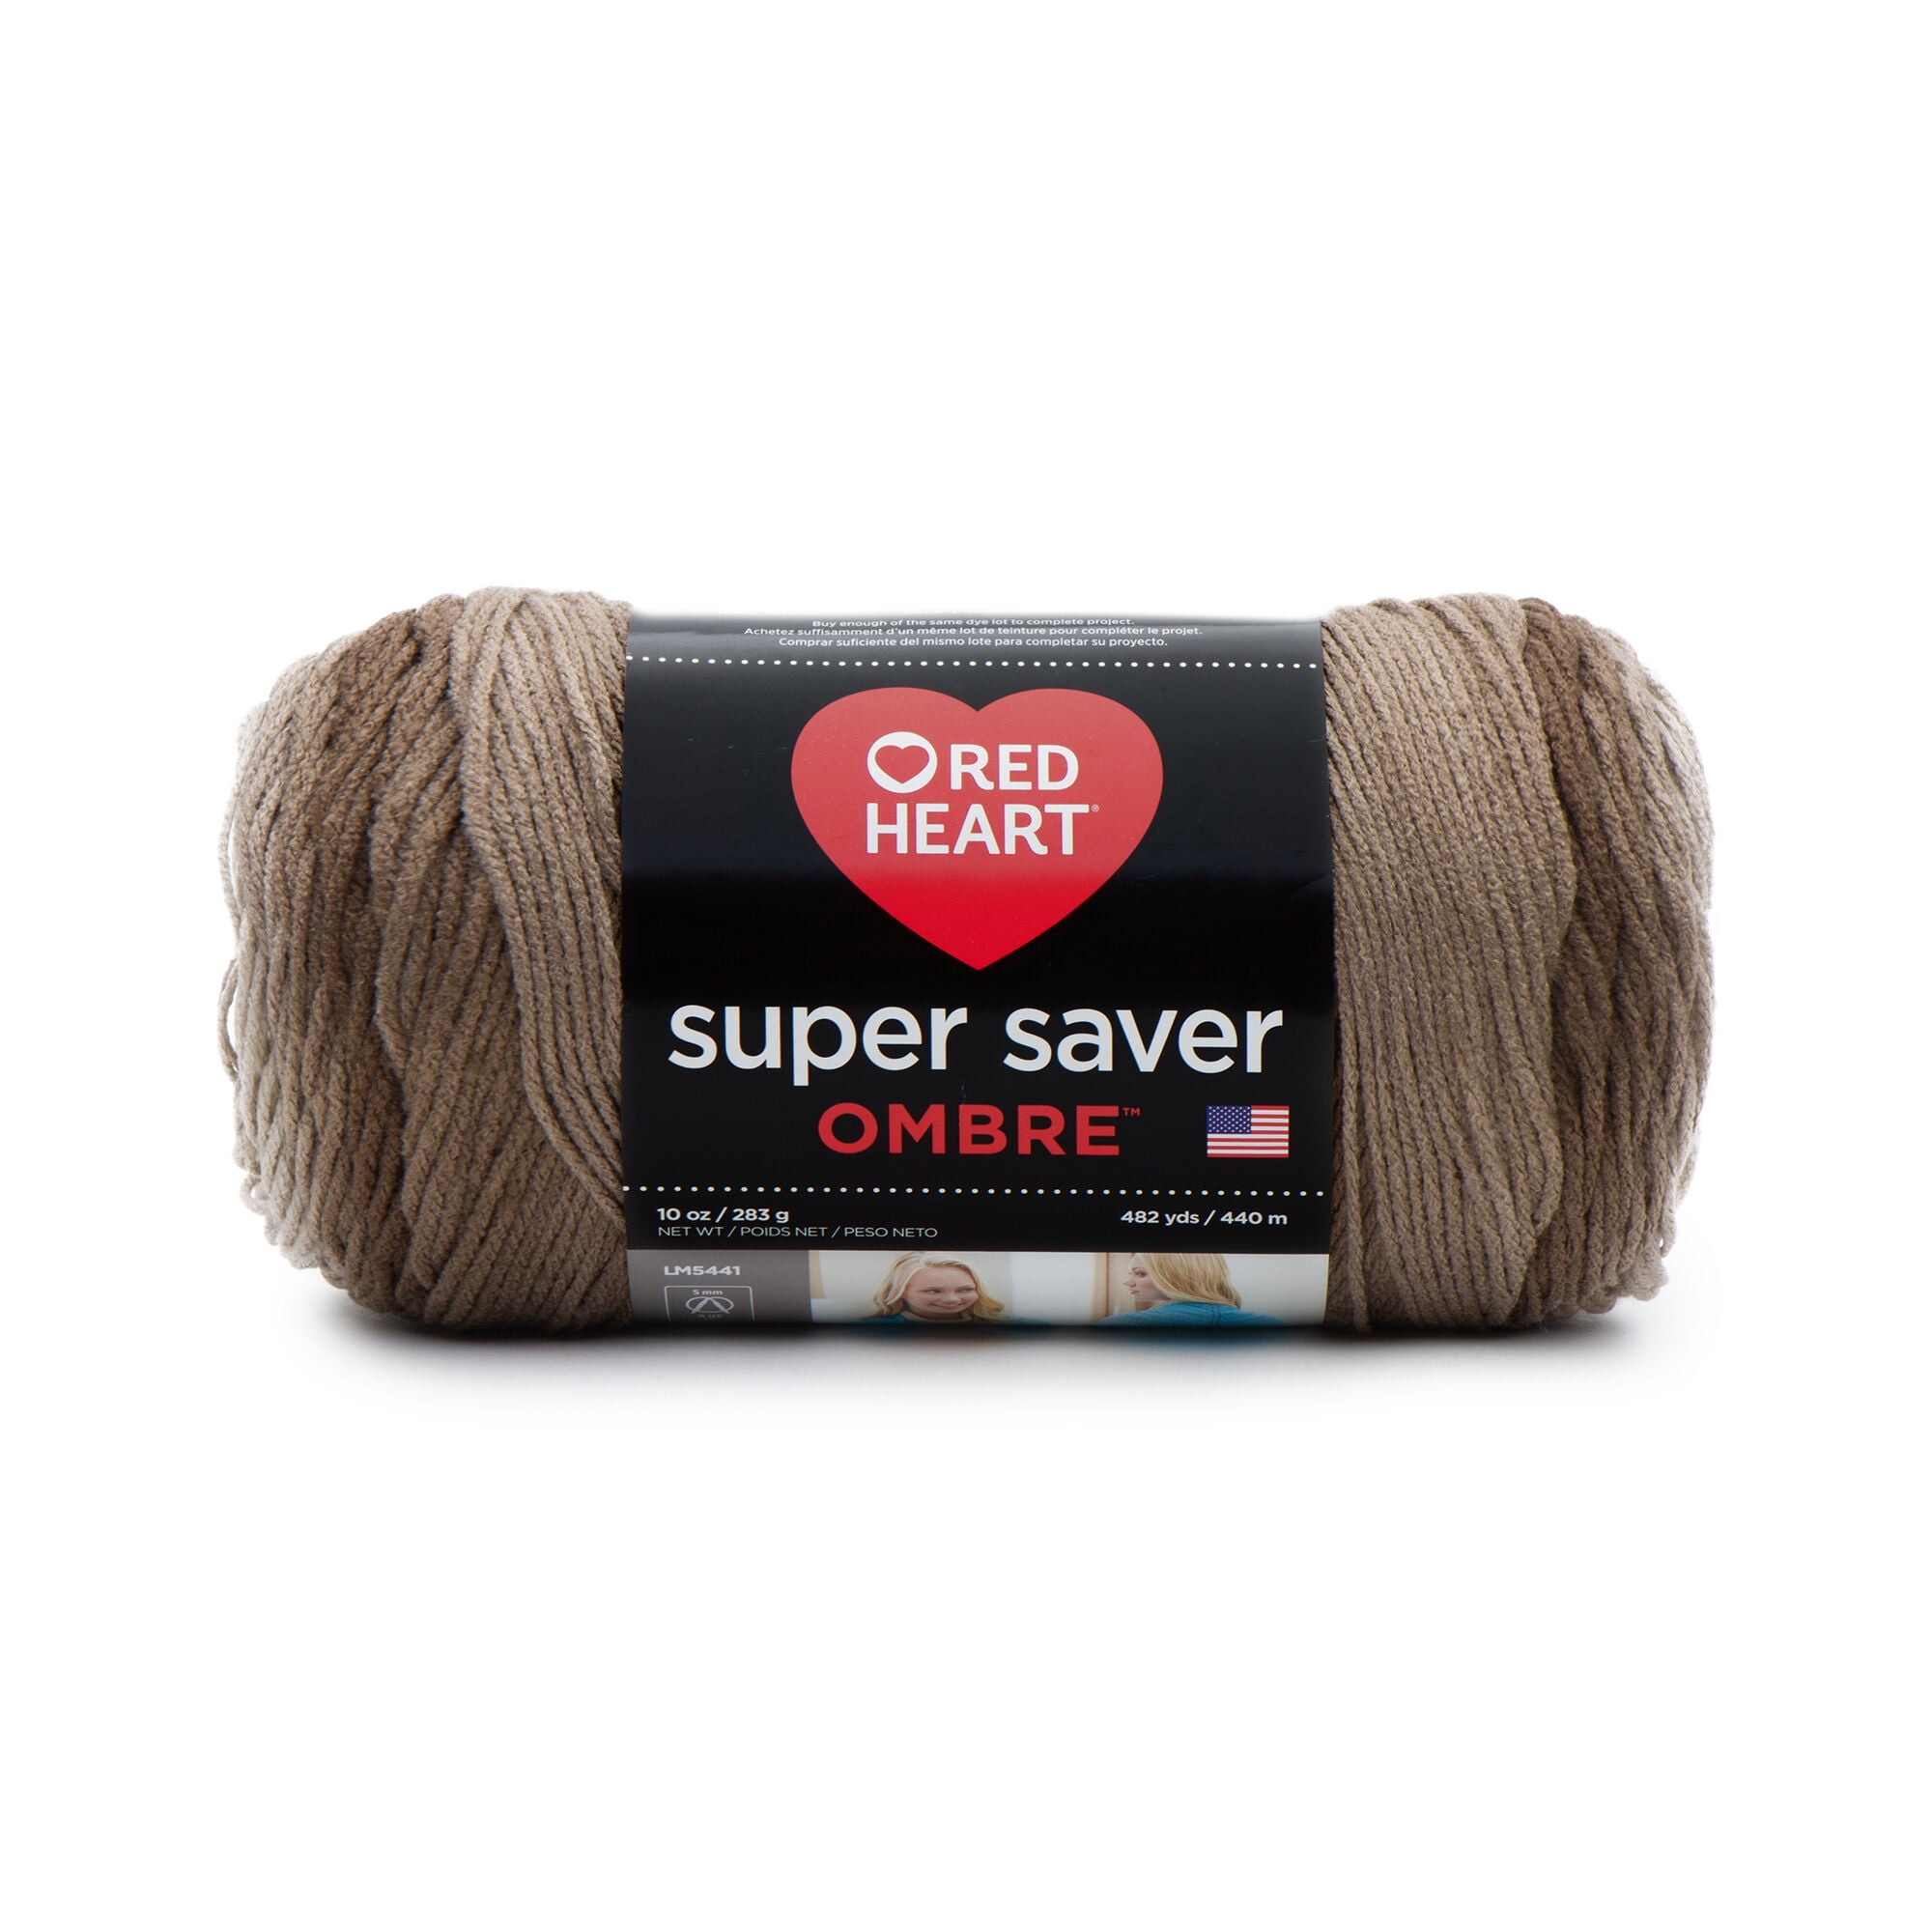 Red Heart Super Saver Ombre Sand Yarn - 2 Pack of 10oz/283g - Acrylic - 4  Medium (Worsted) - 482 Yards - Knitting/Crochet